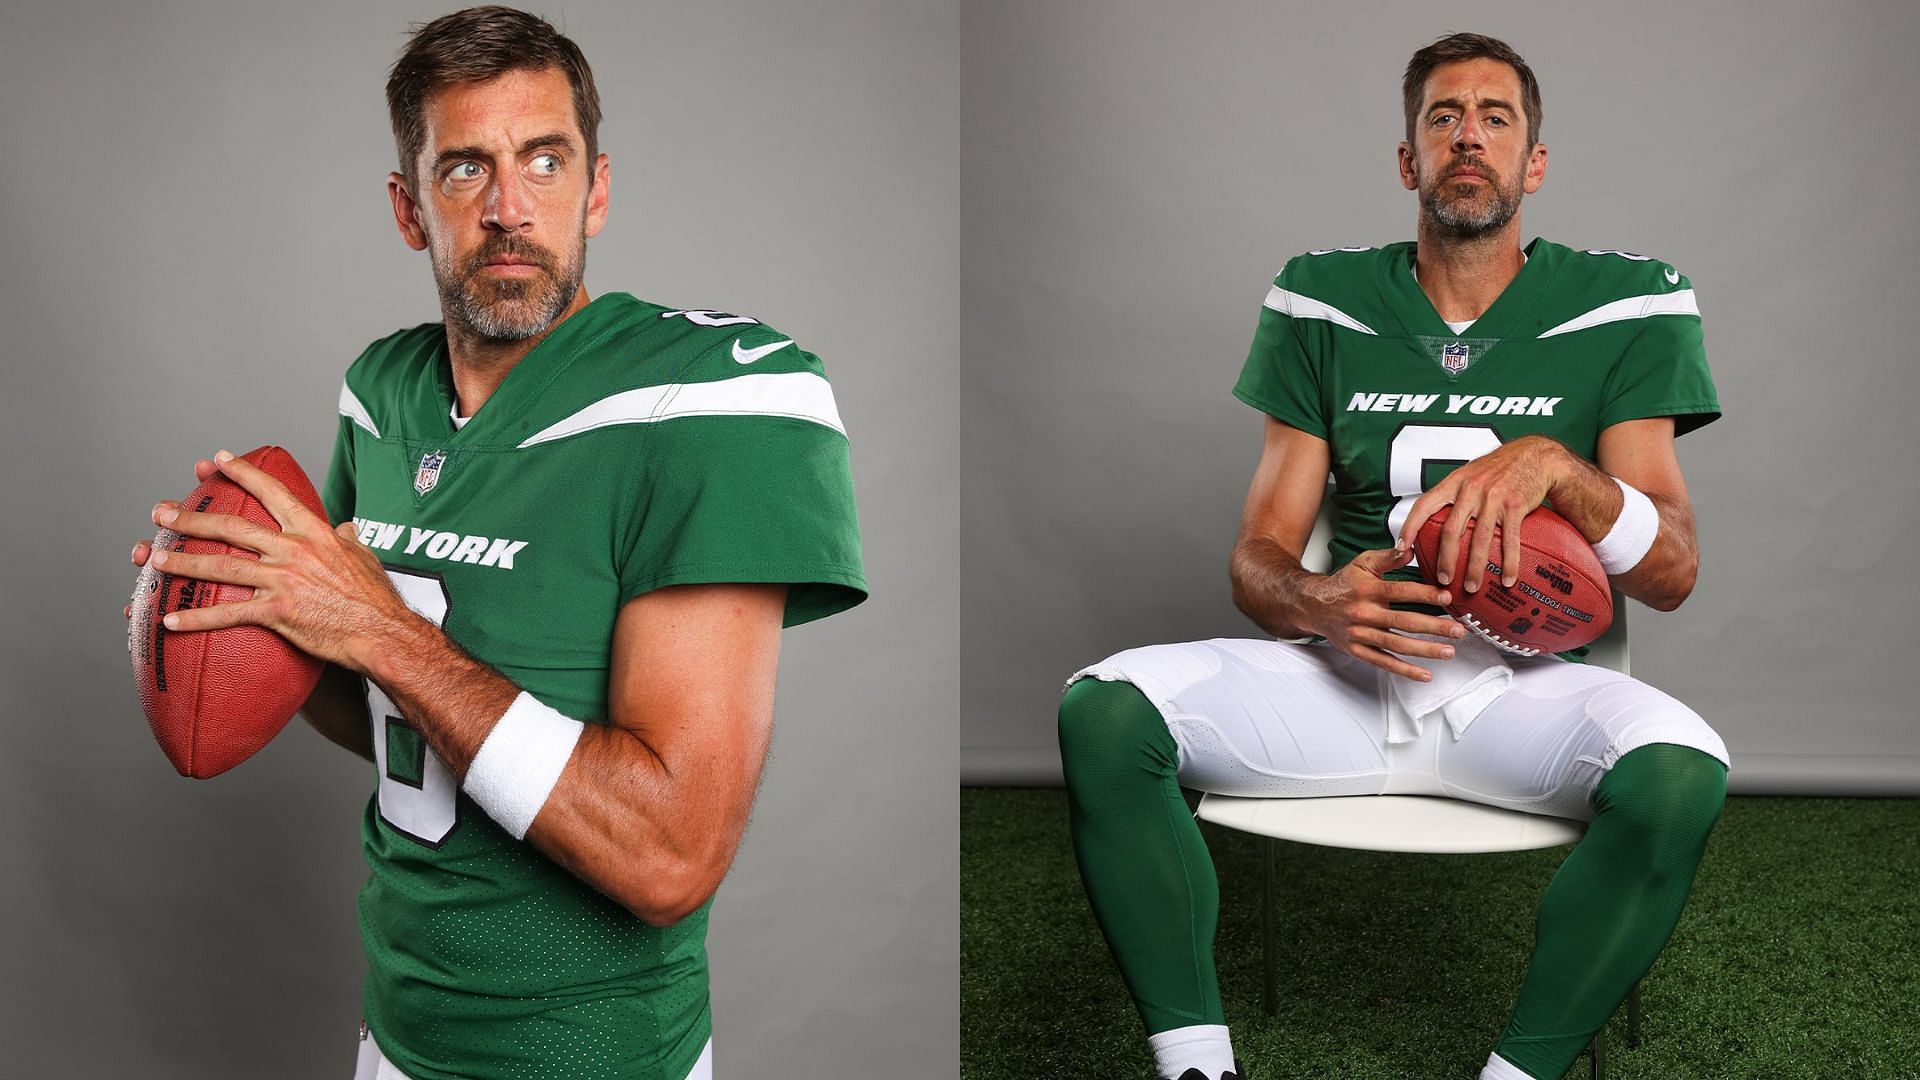 How i made this Aaron Rodgers Jets Graphic #CapCut #photoshop #photosh